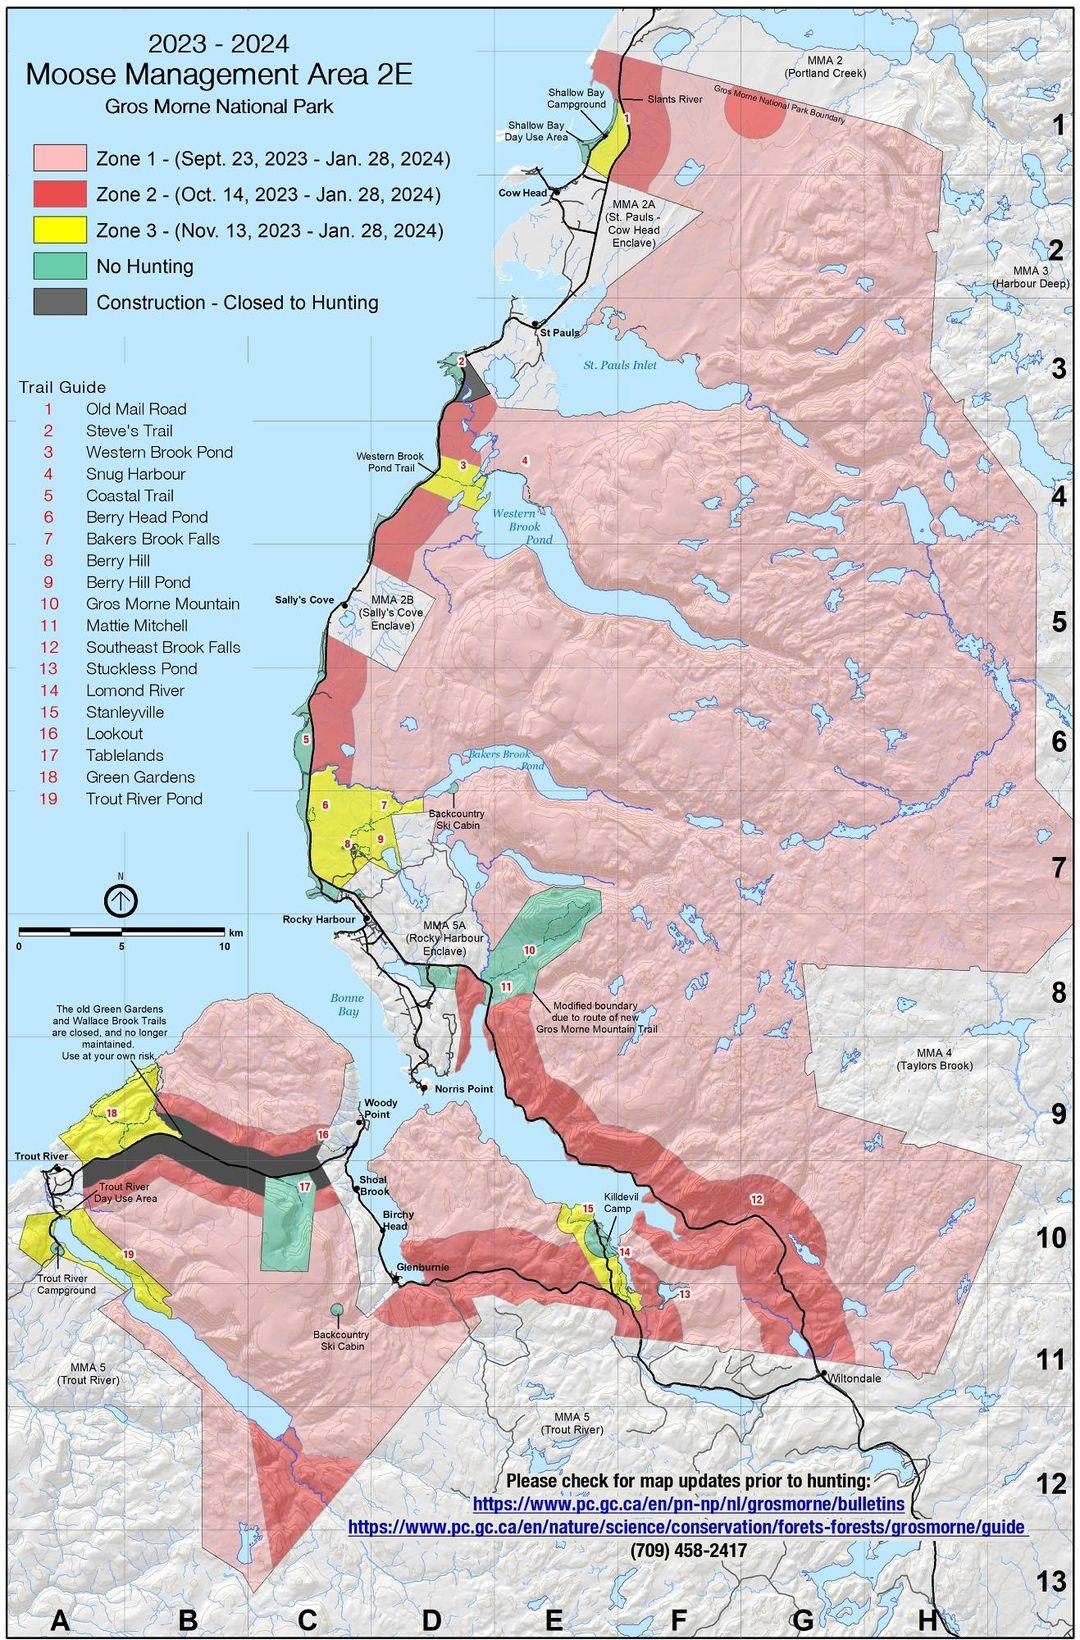 The Moose Management Area zones and dates for Gros Morne National Park in 2023-2024.